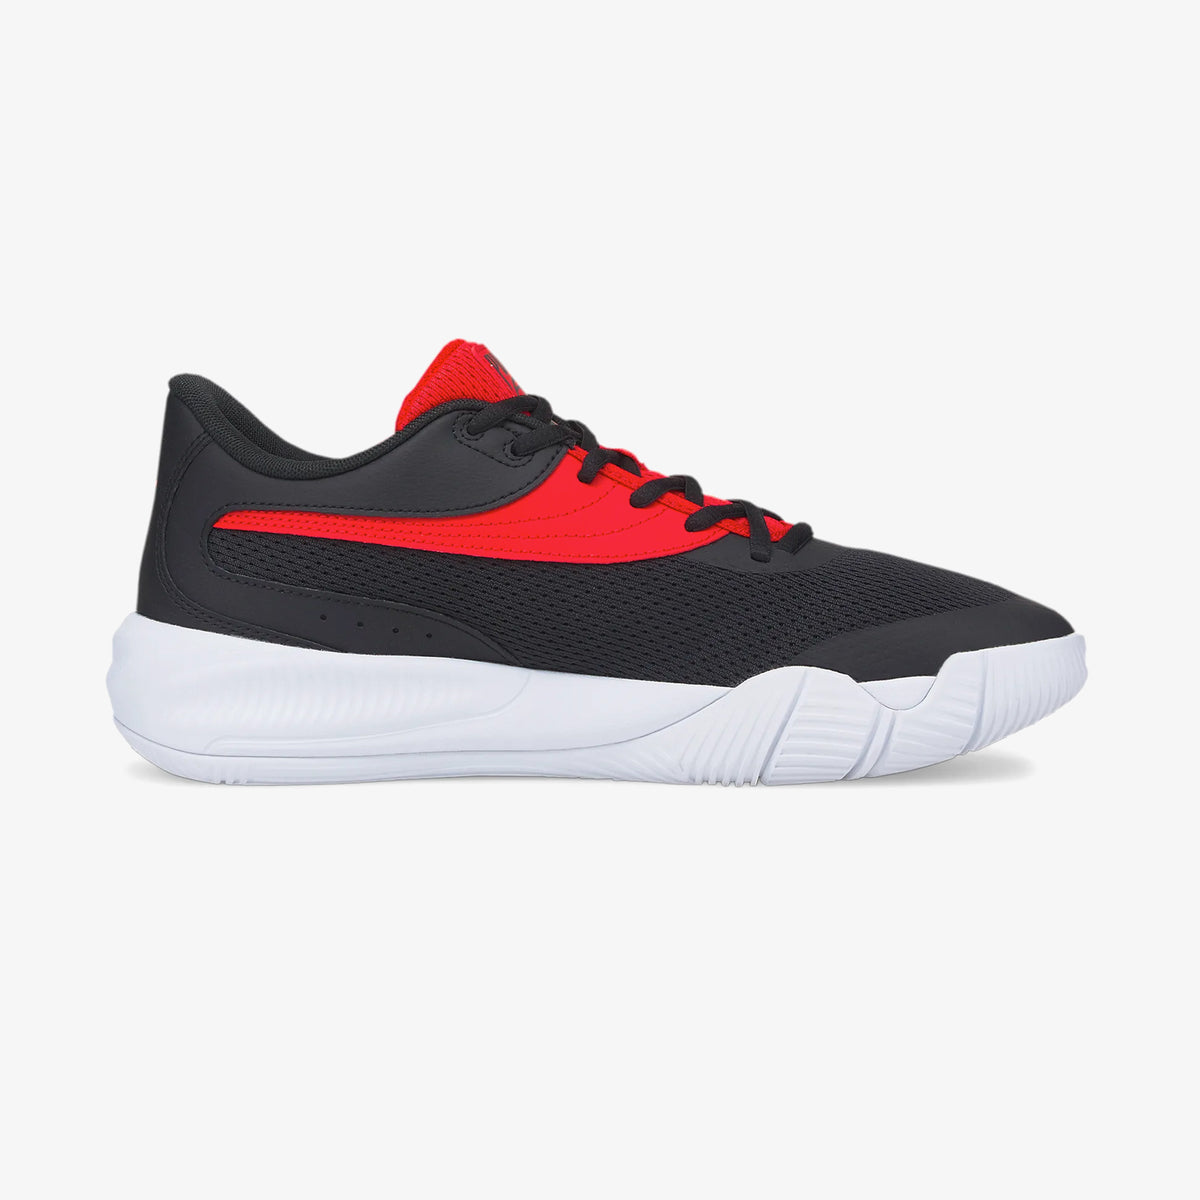 Triple Basketball Shoes - Black/Red